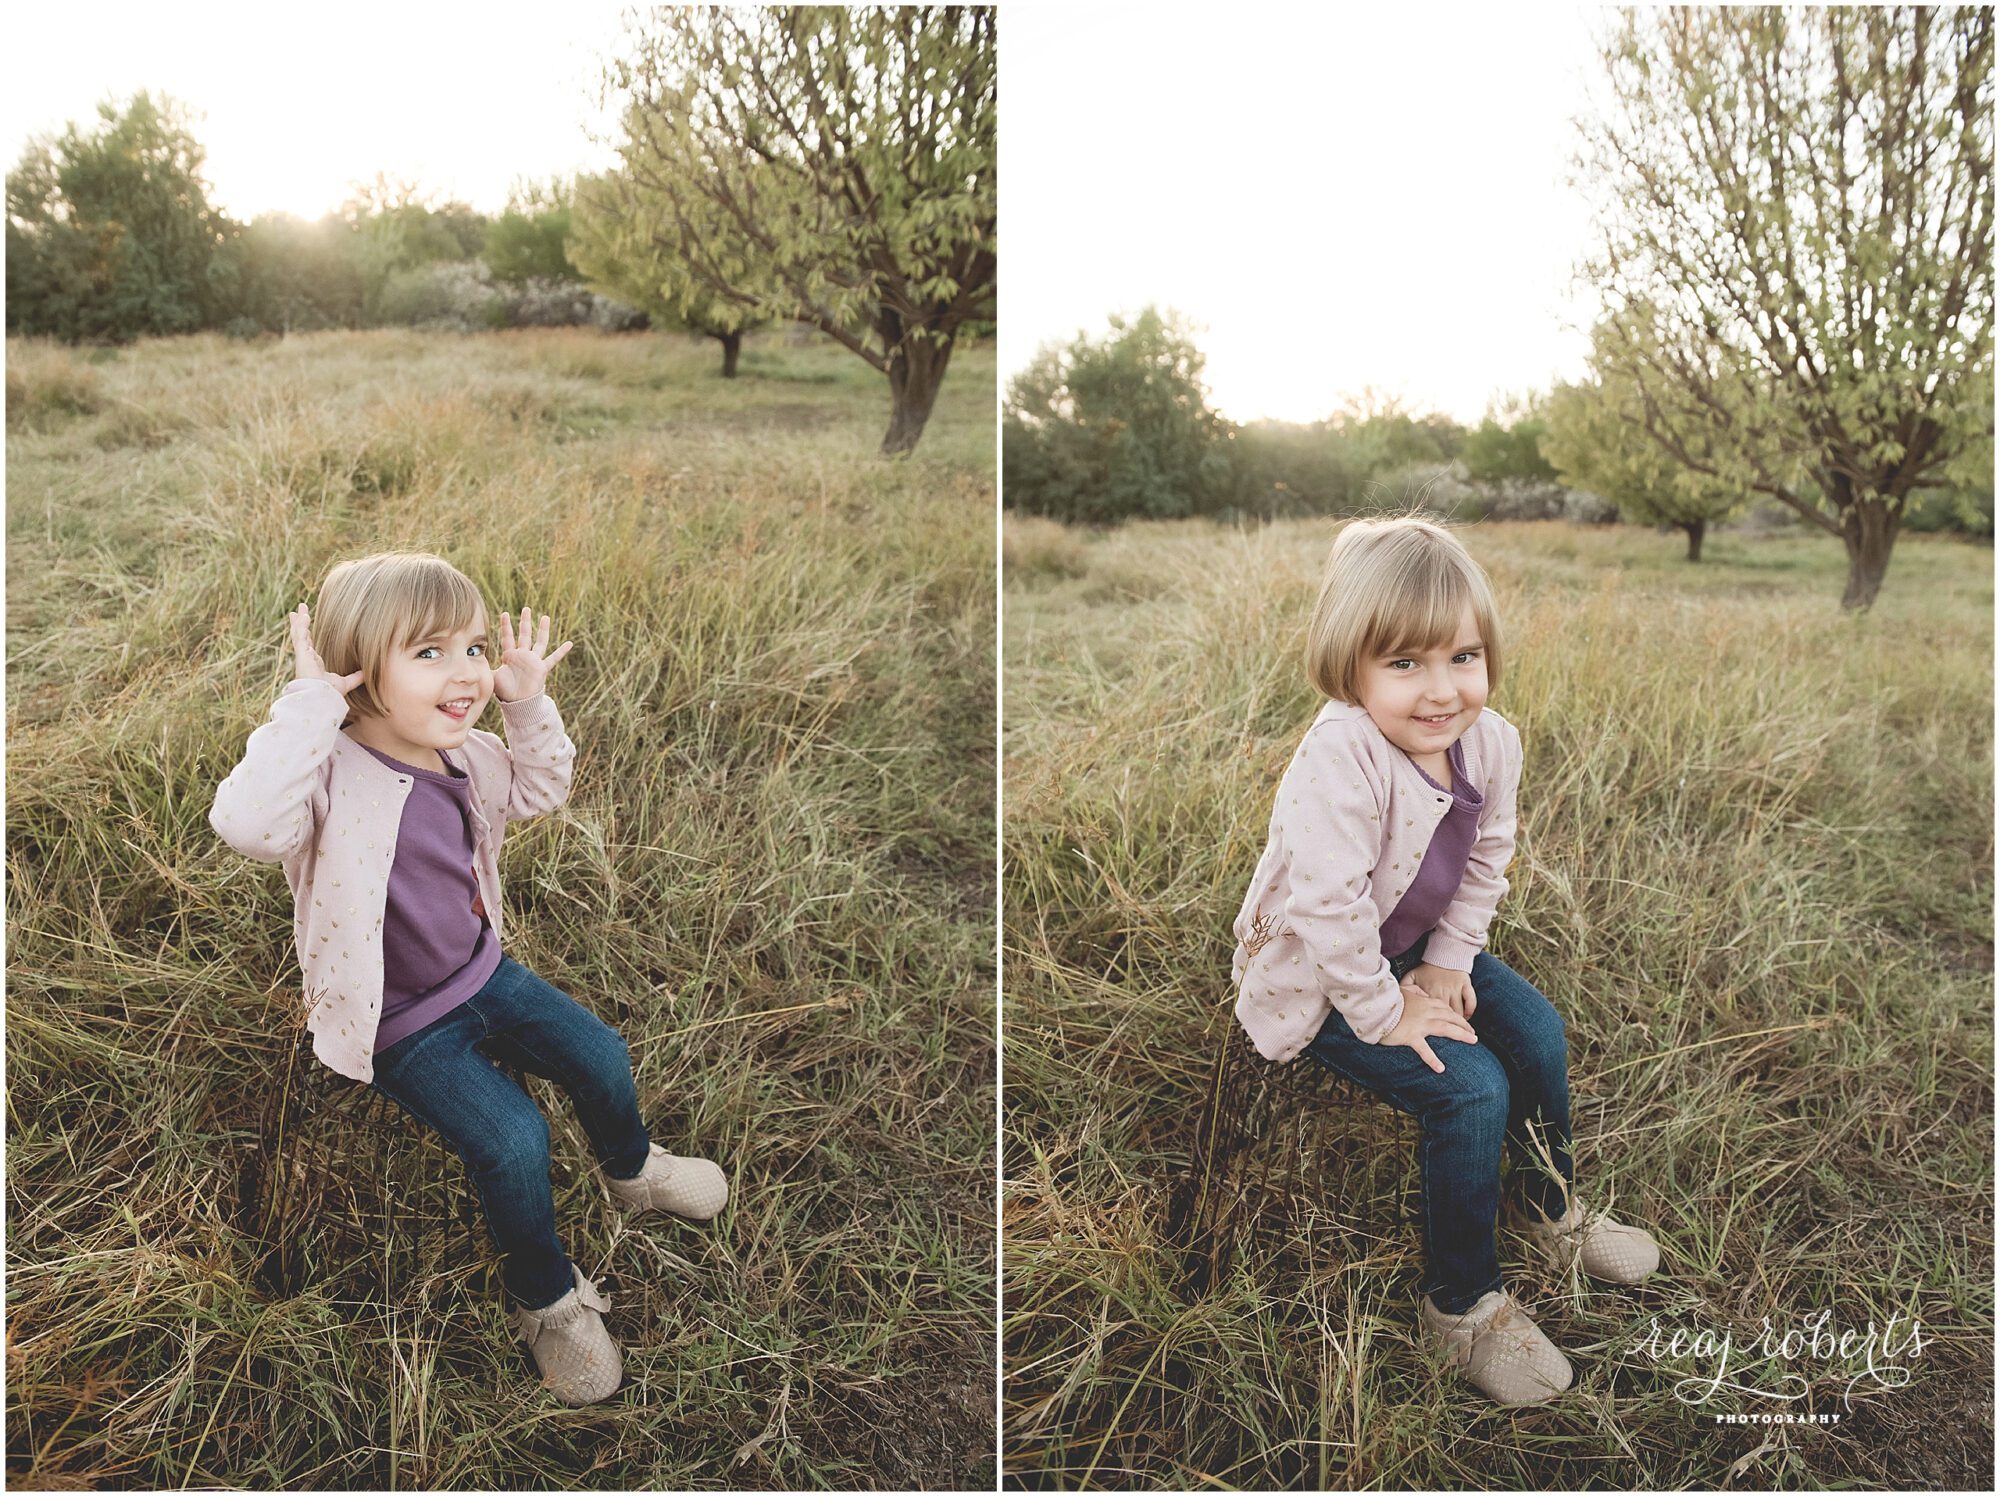 Chandler Child and Family Photographer | Reaj Roberts Photography